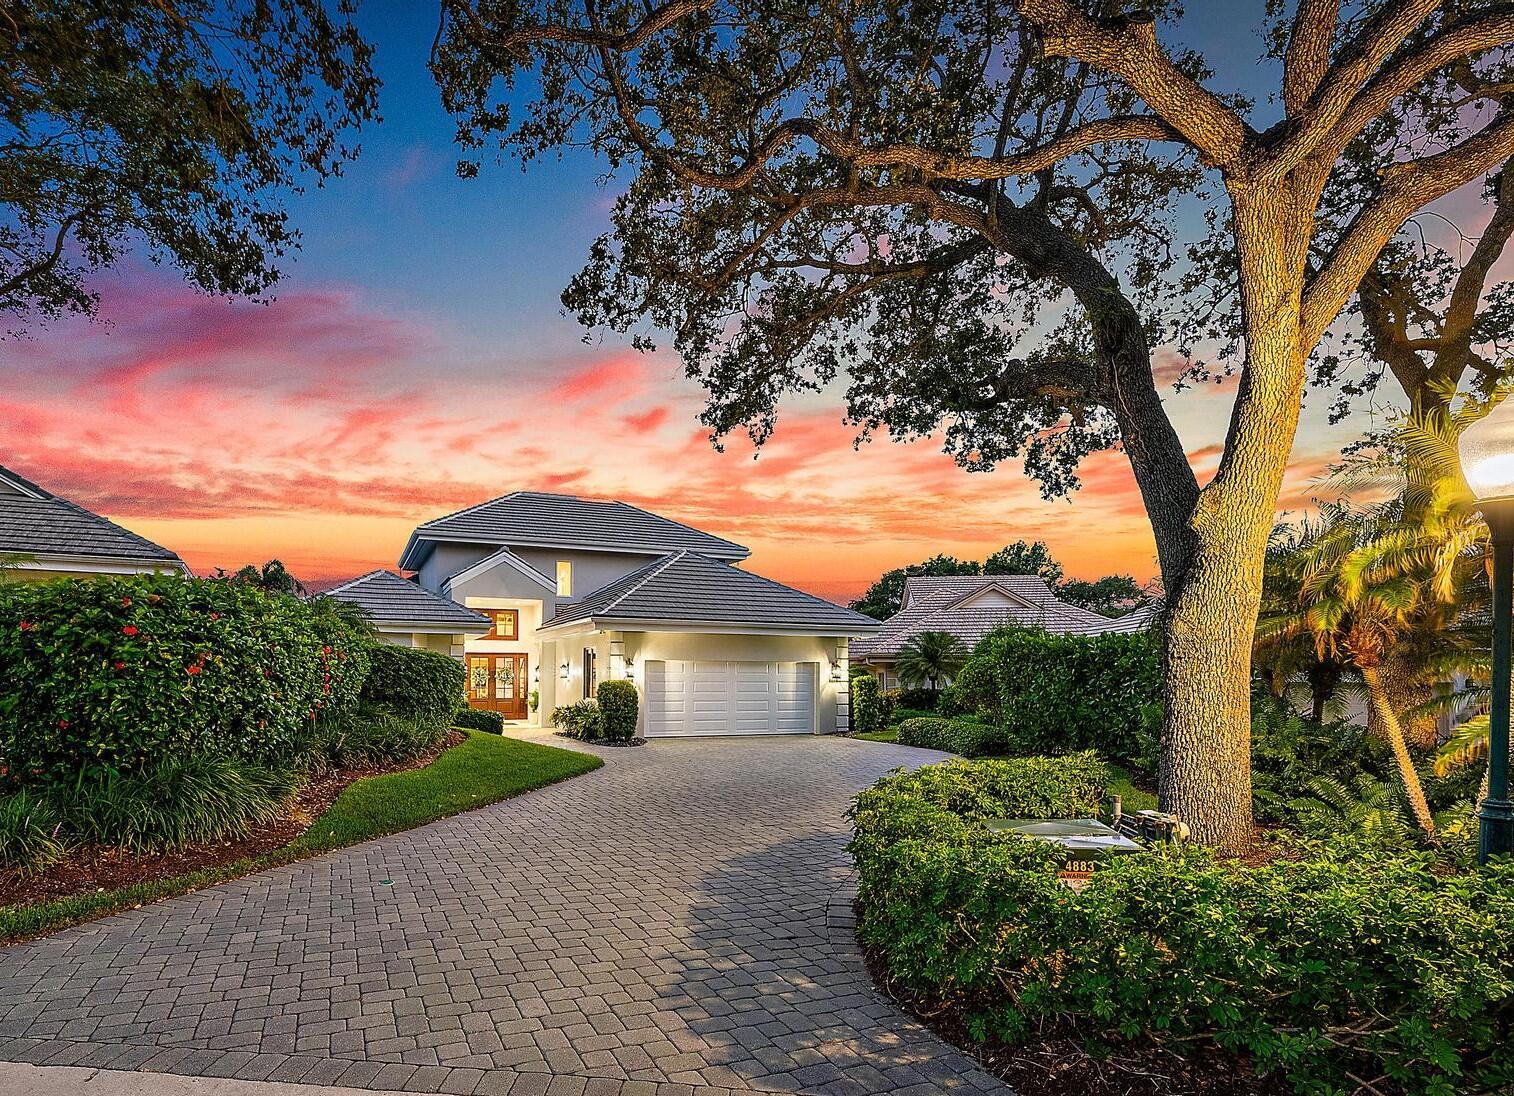 Nestled within the esteemed enclave of Jupiter Hills, this home presents a rare opportunity to reside in an exclusive private golf gated community.  The property showcases a fully renovated, turnkey residence, offering breathtaking views of the picturesque 15th hole of the Jupiter Hills Village golf course, situated on one of the community's highest elevations.  Notably, it offers the privilege of residing without a mandatory membership requirement. This expanded Prestwick model home captivates with extraordinary attention to detail. Meticulously maintained, it has seen substantial investment over the past two years in luxury and designer appointments. This home boasts a new roof installed in 2020, newly fitted AC units from the same year (with four AC zones throughout the home), full impact windows, a new Hoover awning across the patio, a new outdoor Mount Alpi modular grill with fridge, a water filtration/softening system and a whole-home generator.

The master suite features a dedicated seating area, separate vanities, custom closets, and luxurious fixtures. Throughout the home, meticulous updates abound, from fresh interior and exterior paint to custom cabinetry and woodwork throughout, lustrous hardwood floors, hardwood plantation shutters, a new custom bar and new bathrooms with Toto brand accessories. Every detail has been carefully considered, including custom window treatments and upgraded lighting fixtures, culminating in a residence of unparalleled quality and style.